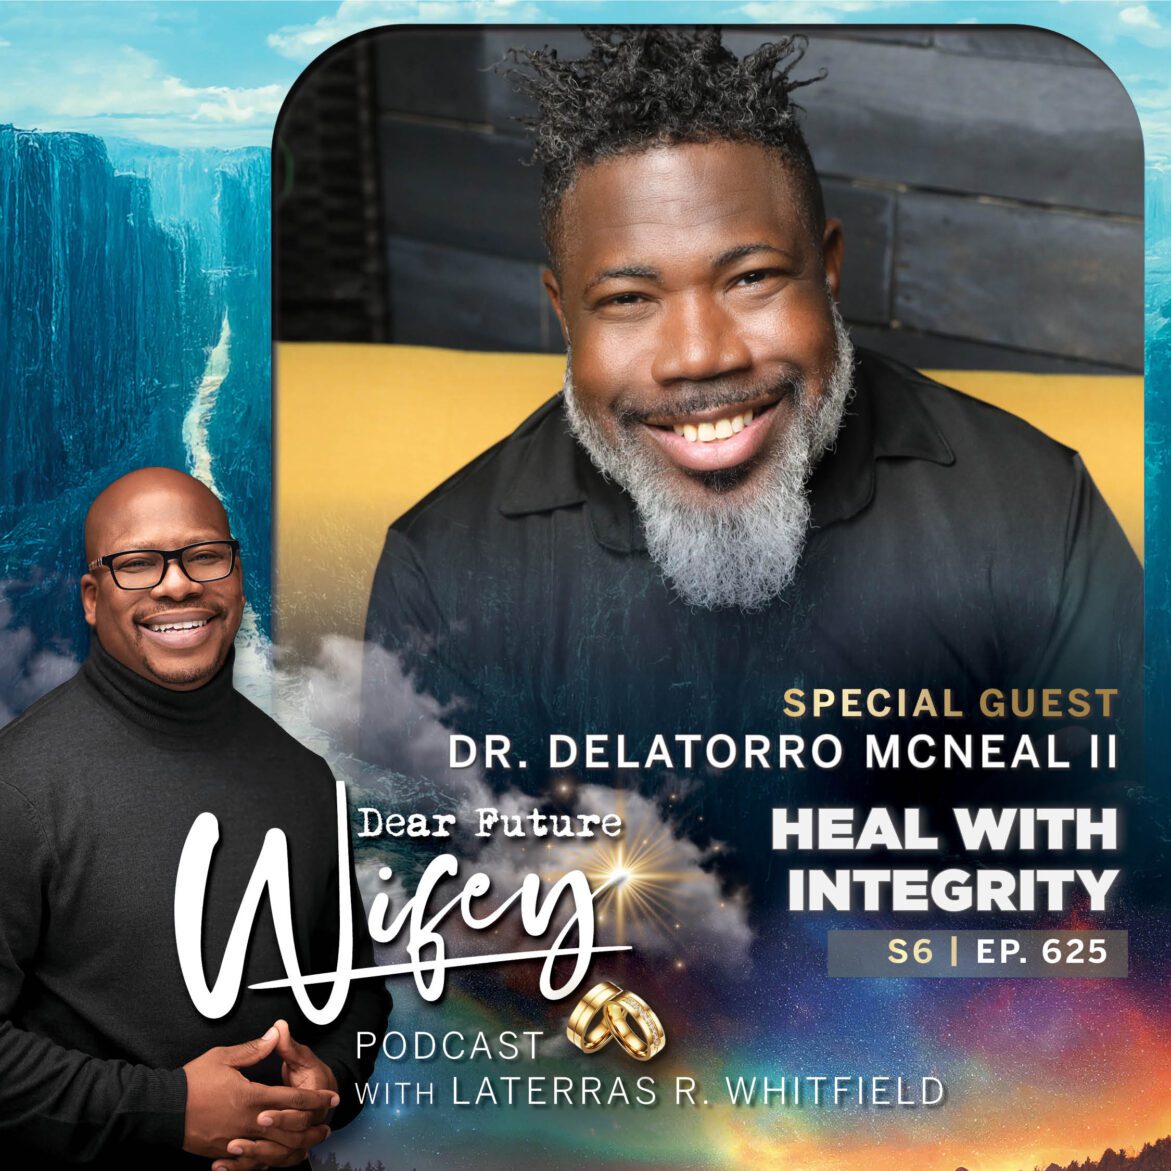 Black Podcasting - Heal With Integrity (Guest: Dr. Delatorro McNeal II)